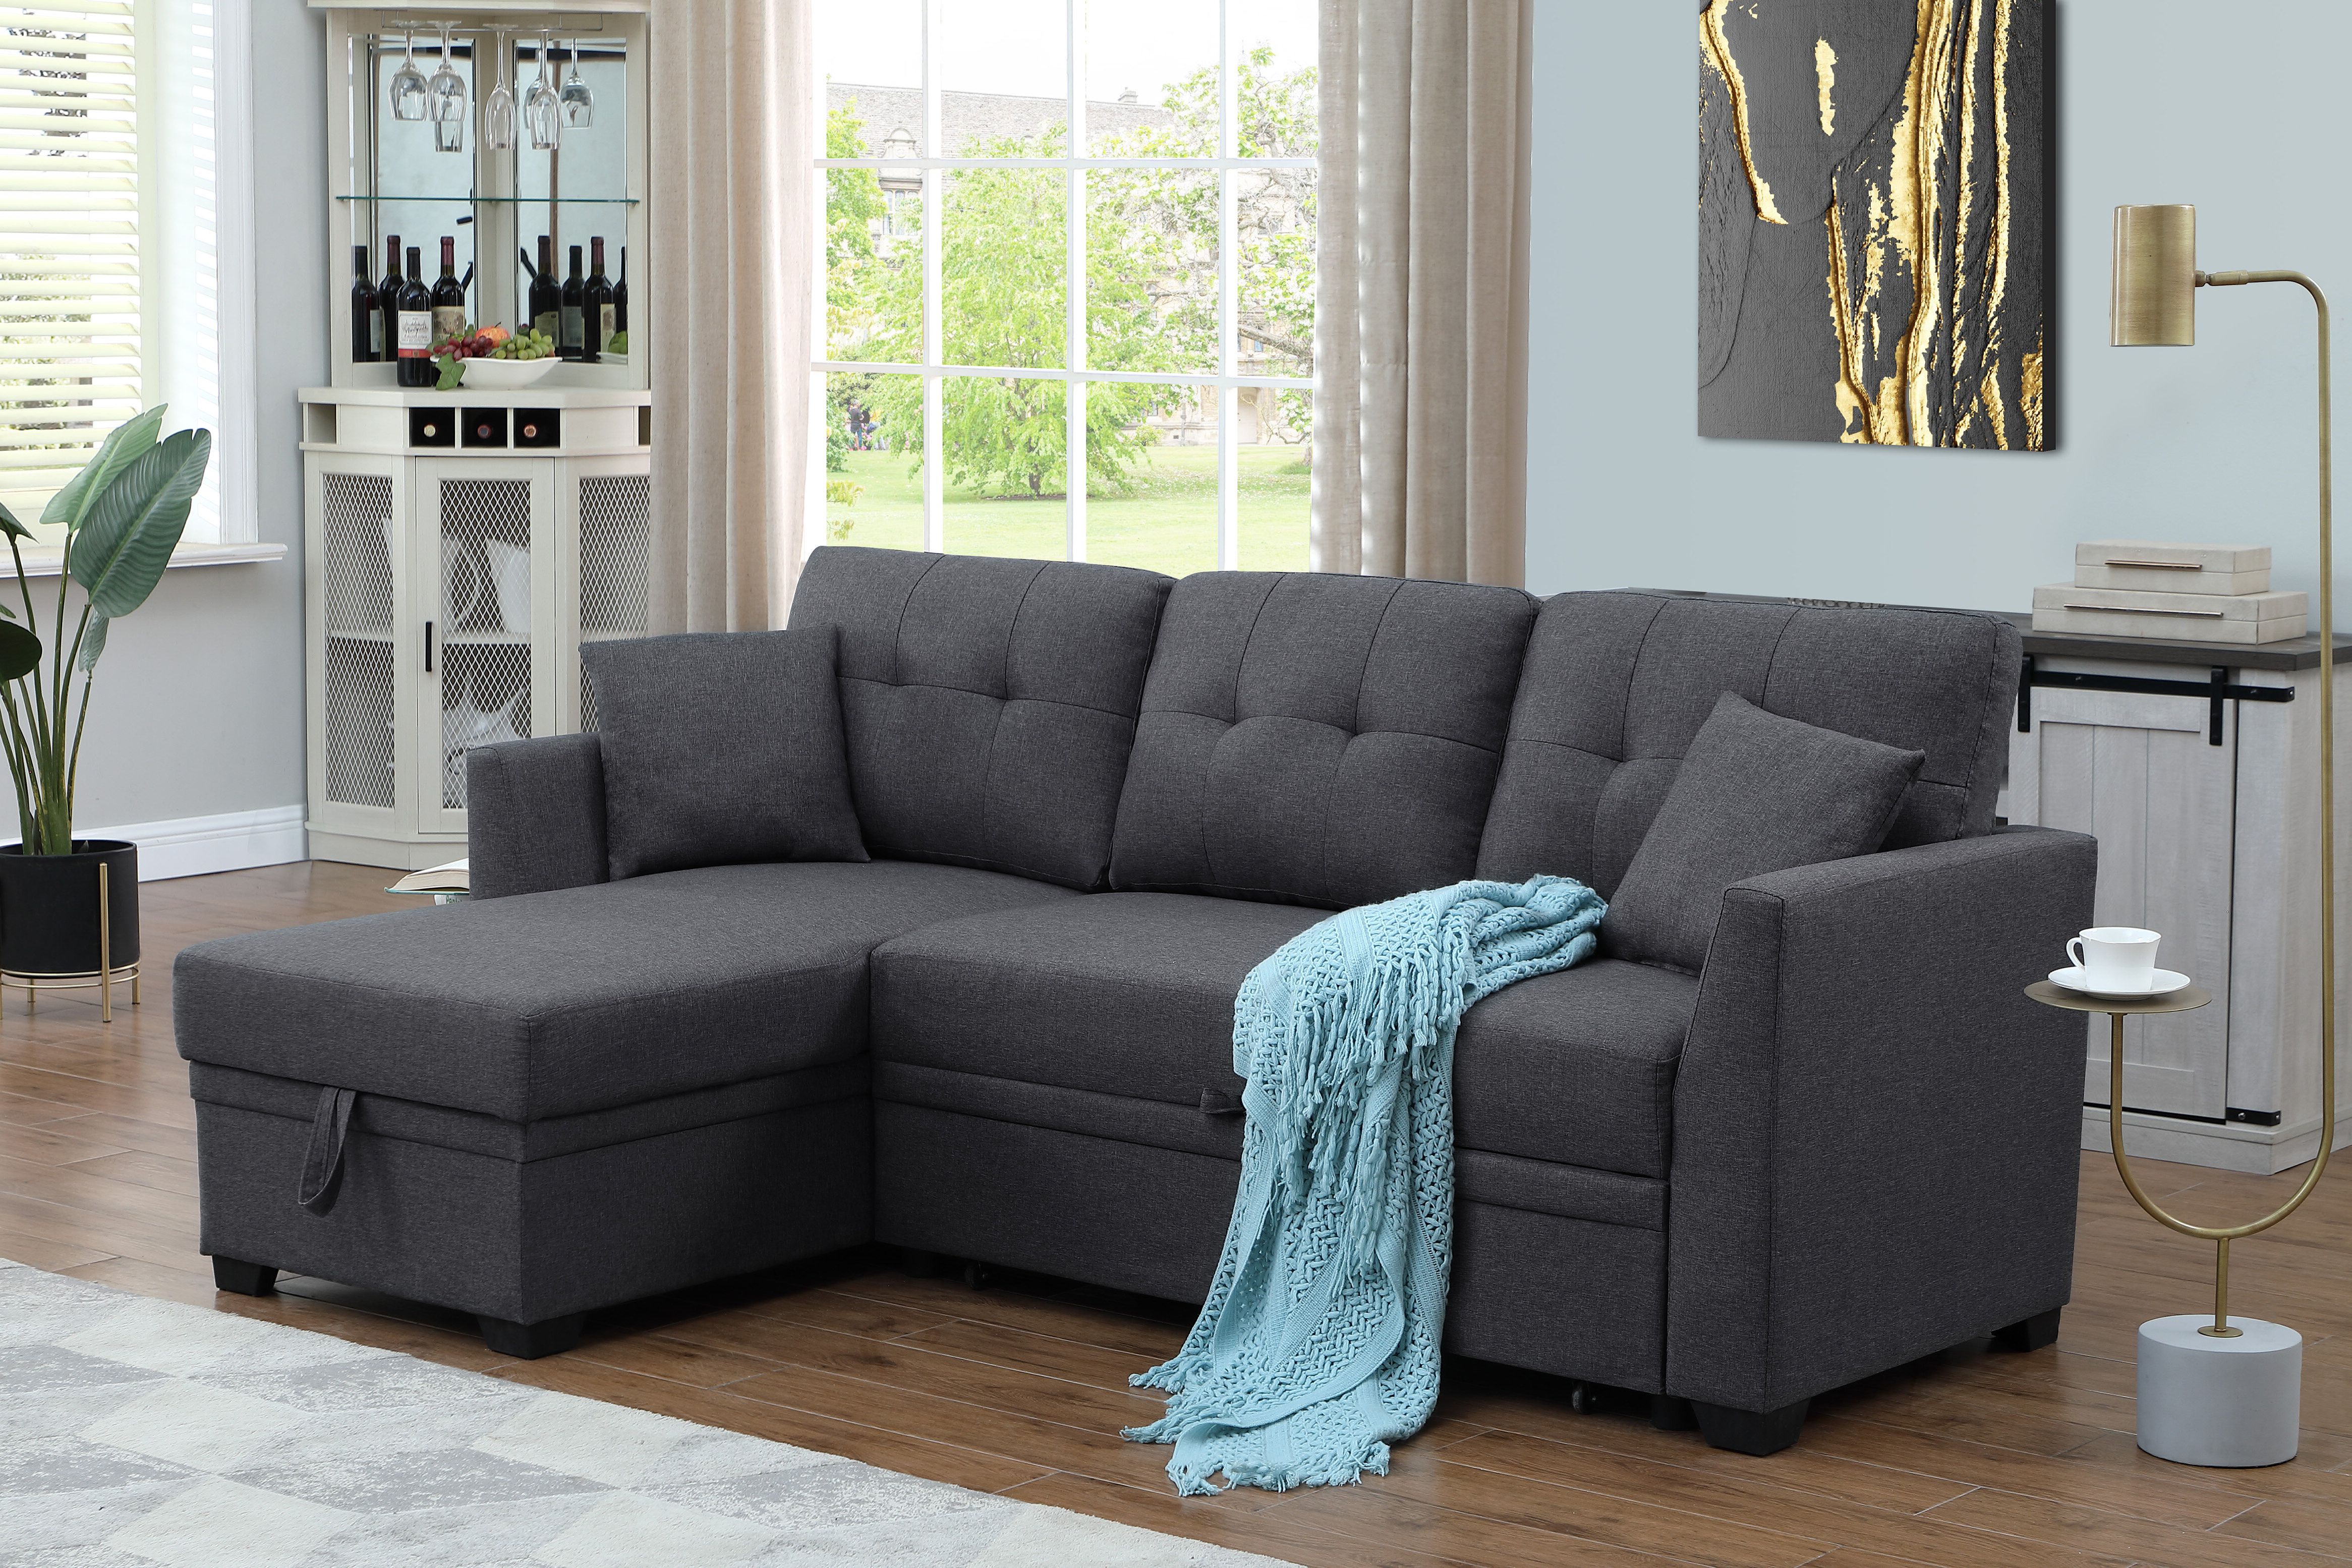 Latitude Run® Convertible Sleeper Sofa & Chaise & Reviews | Wayfair With Convertible Sofa With Matching Chaise (Gallery 1 of 20)